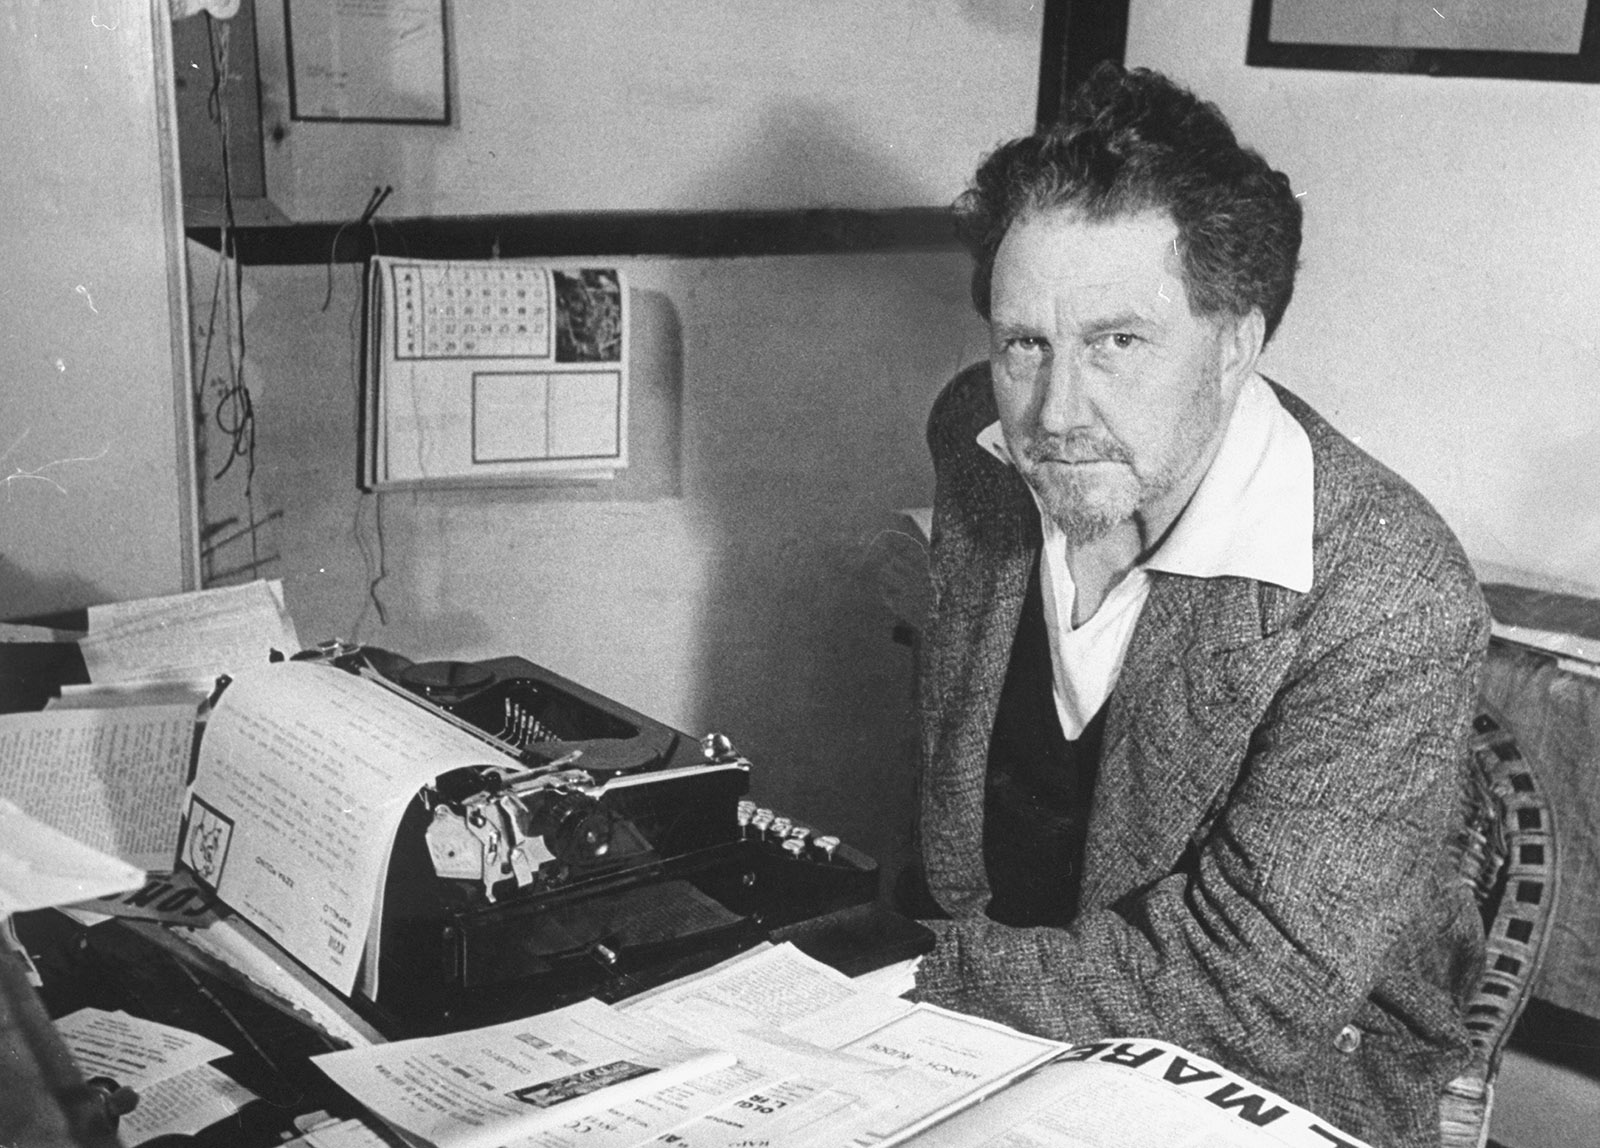 Ezra Pound composing pro-fascist commentaries on stationary emblazoned with Mussolini’s motto “Liberty Is a Duty, Not a Right,” Italy, 1940  